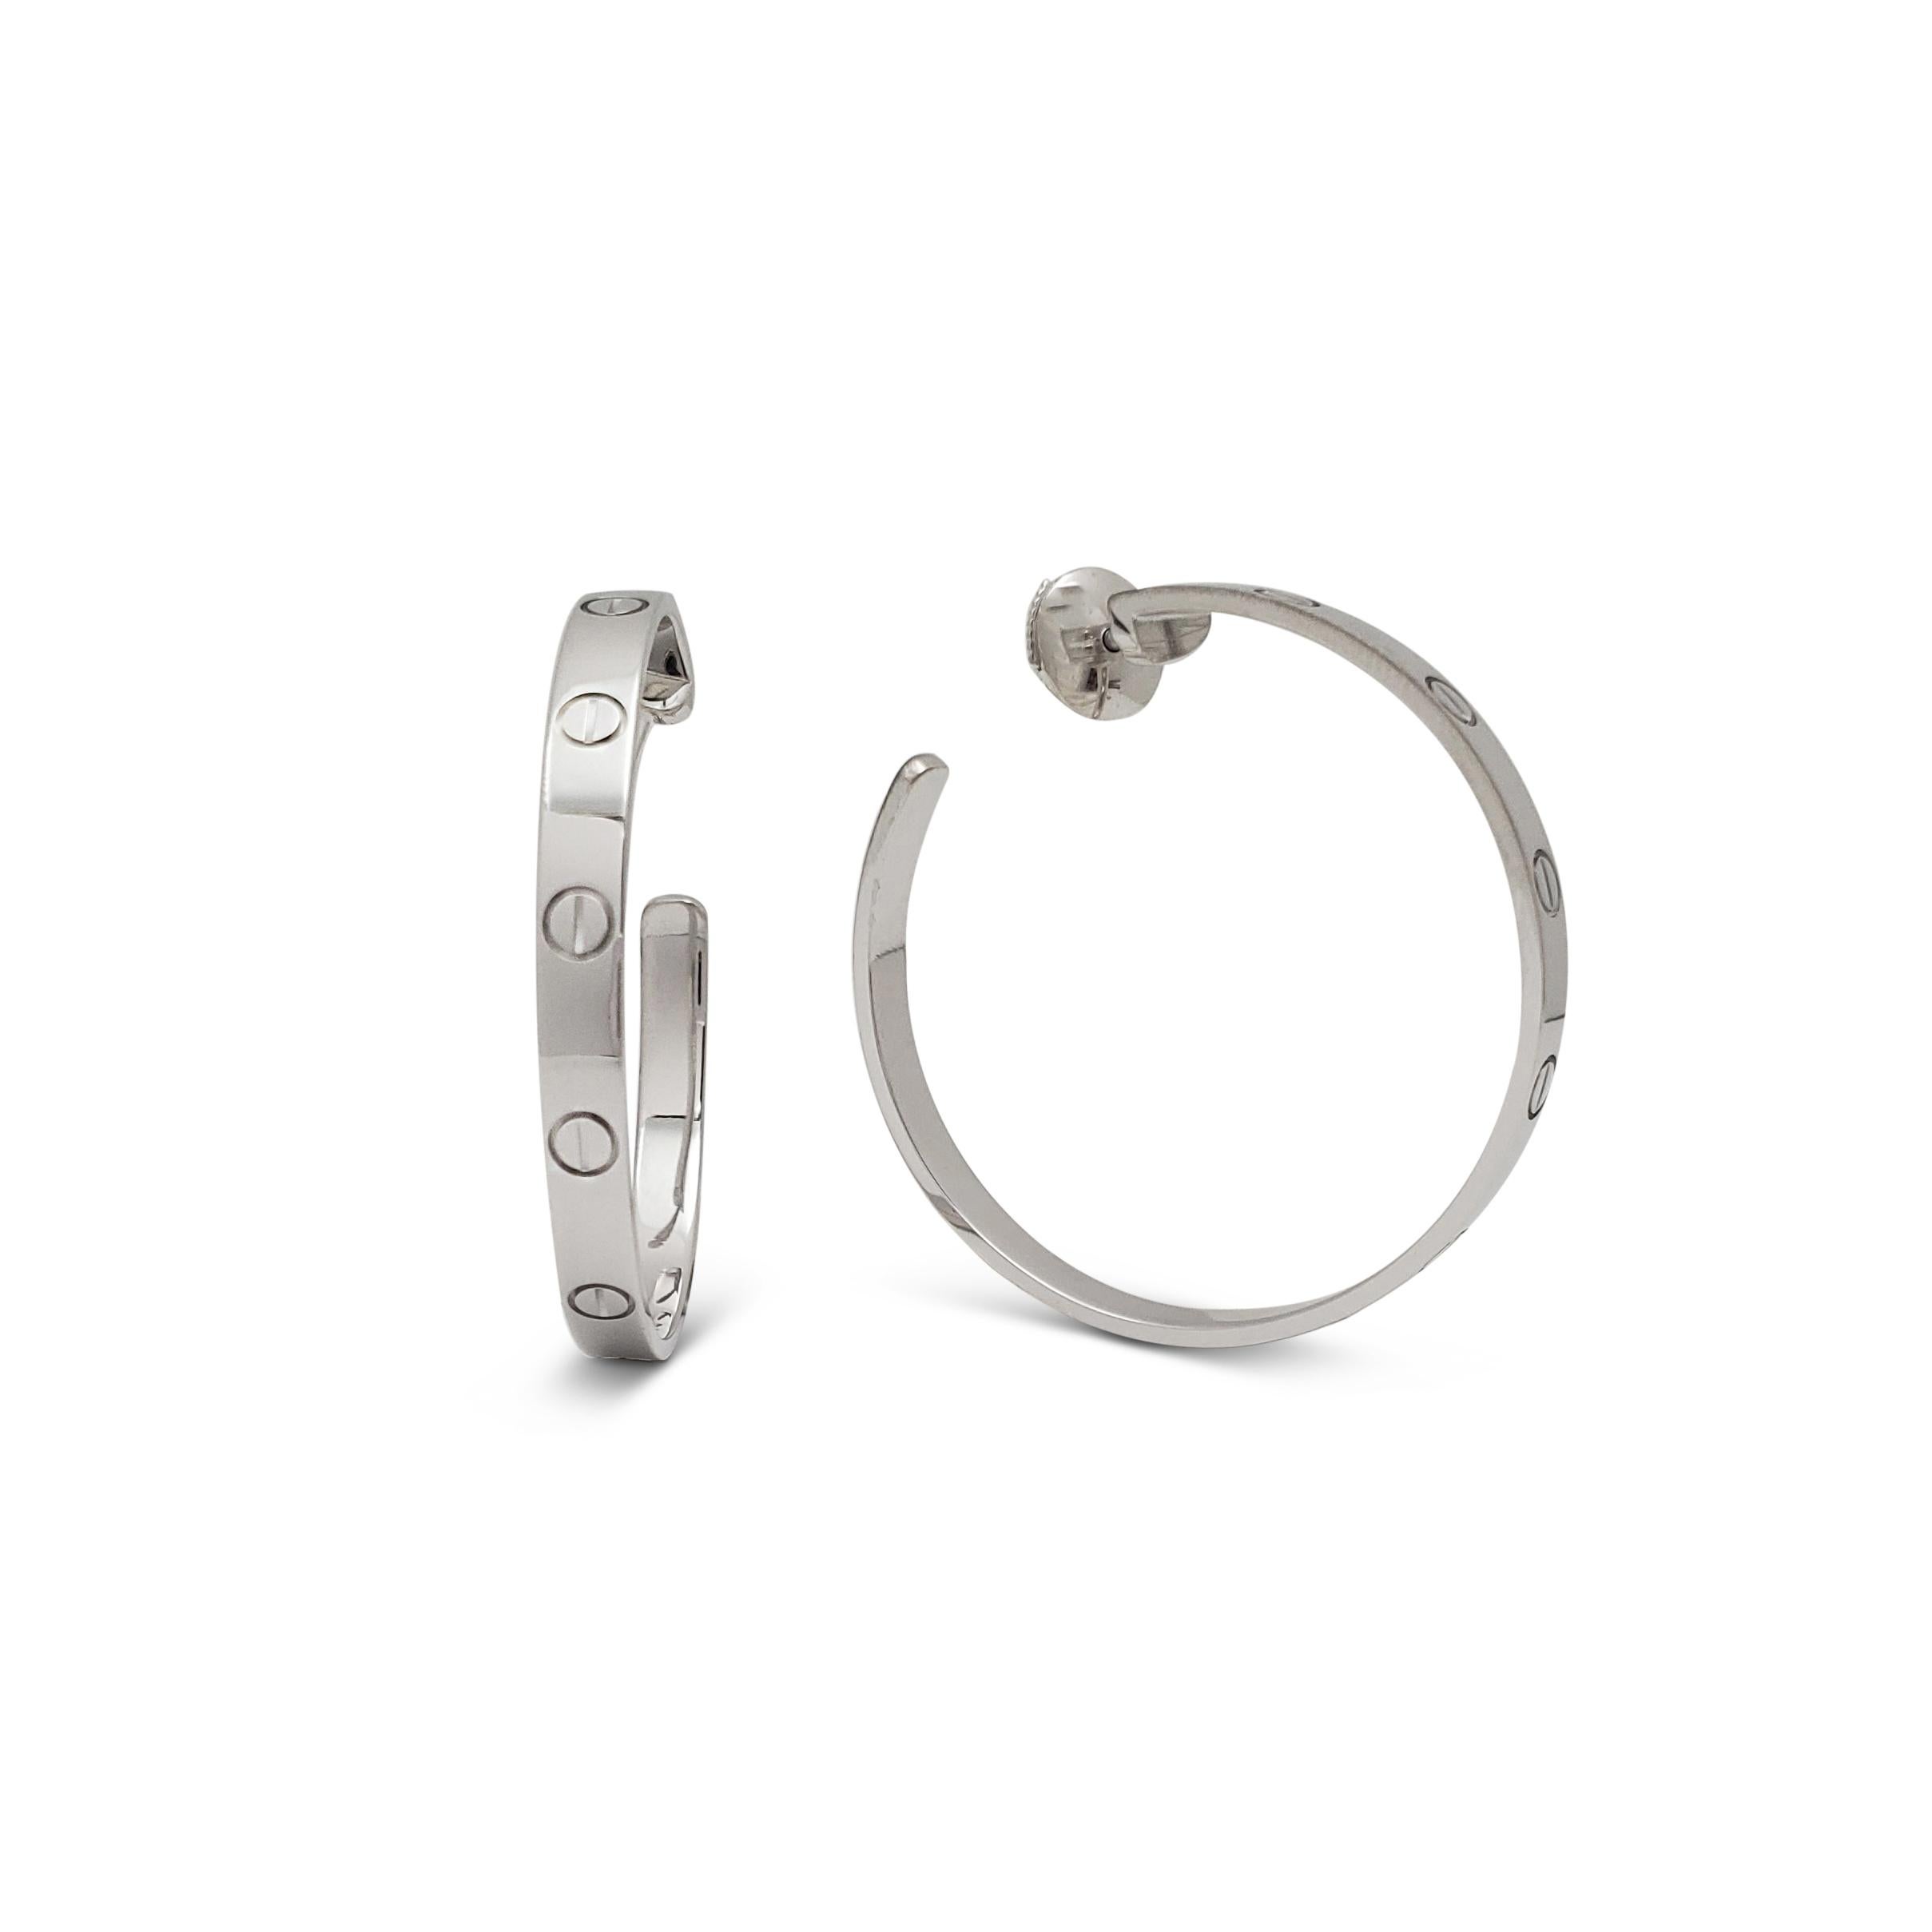 Authentic Cartier Love hoop earrings crafted in 18 karat white gold.  The earrings measure 3.6mm in width and 1.34 inches long.  Signed Cartier, 750, with serial number and hallmark.  Earring backs are signed Cartier, 750, 1999.  The earrings are